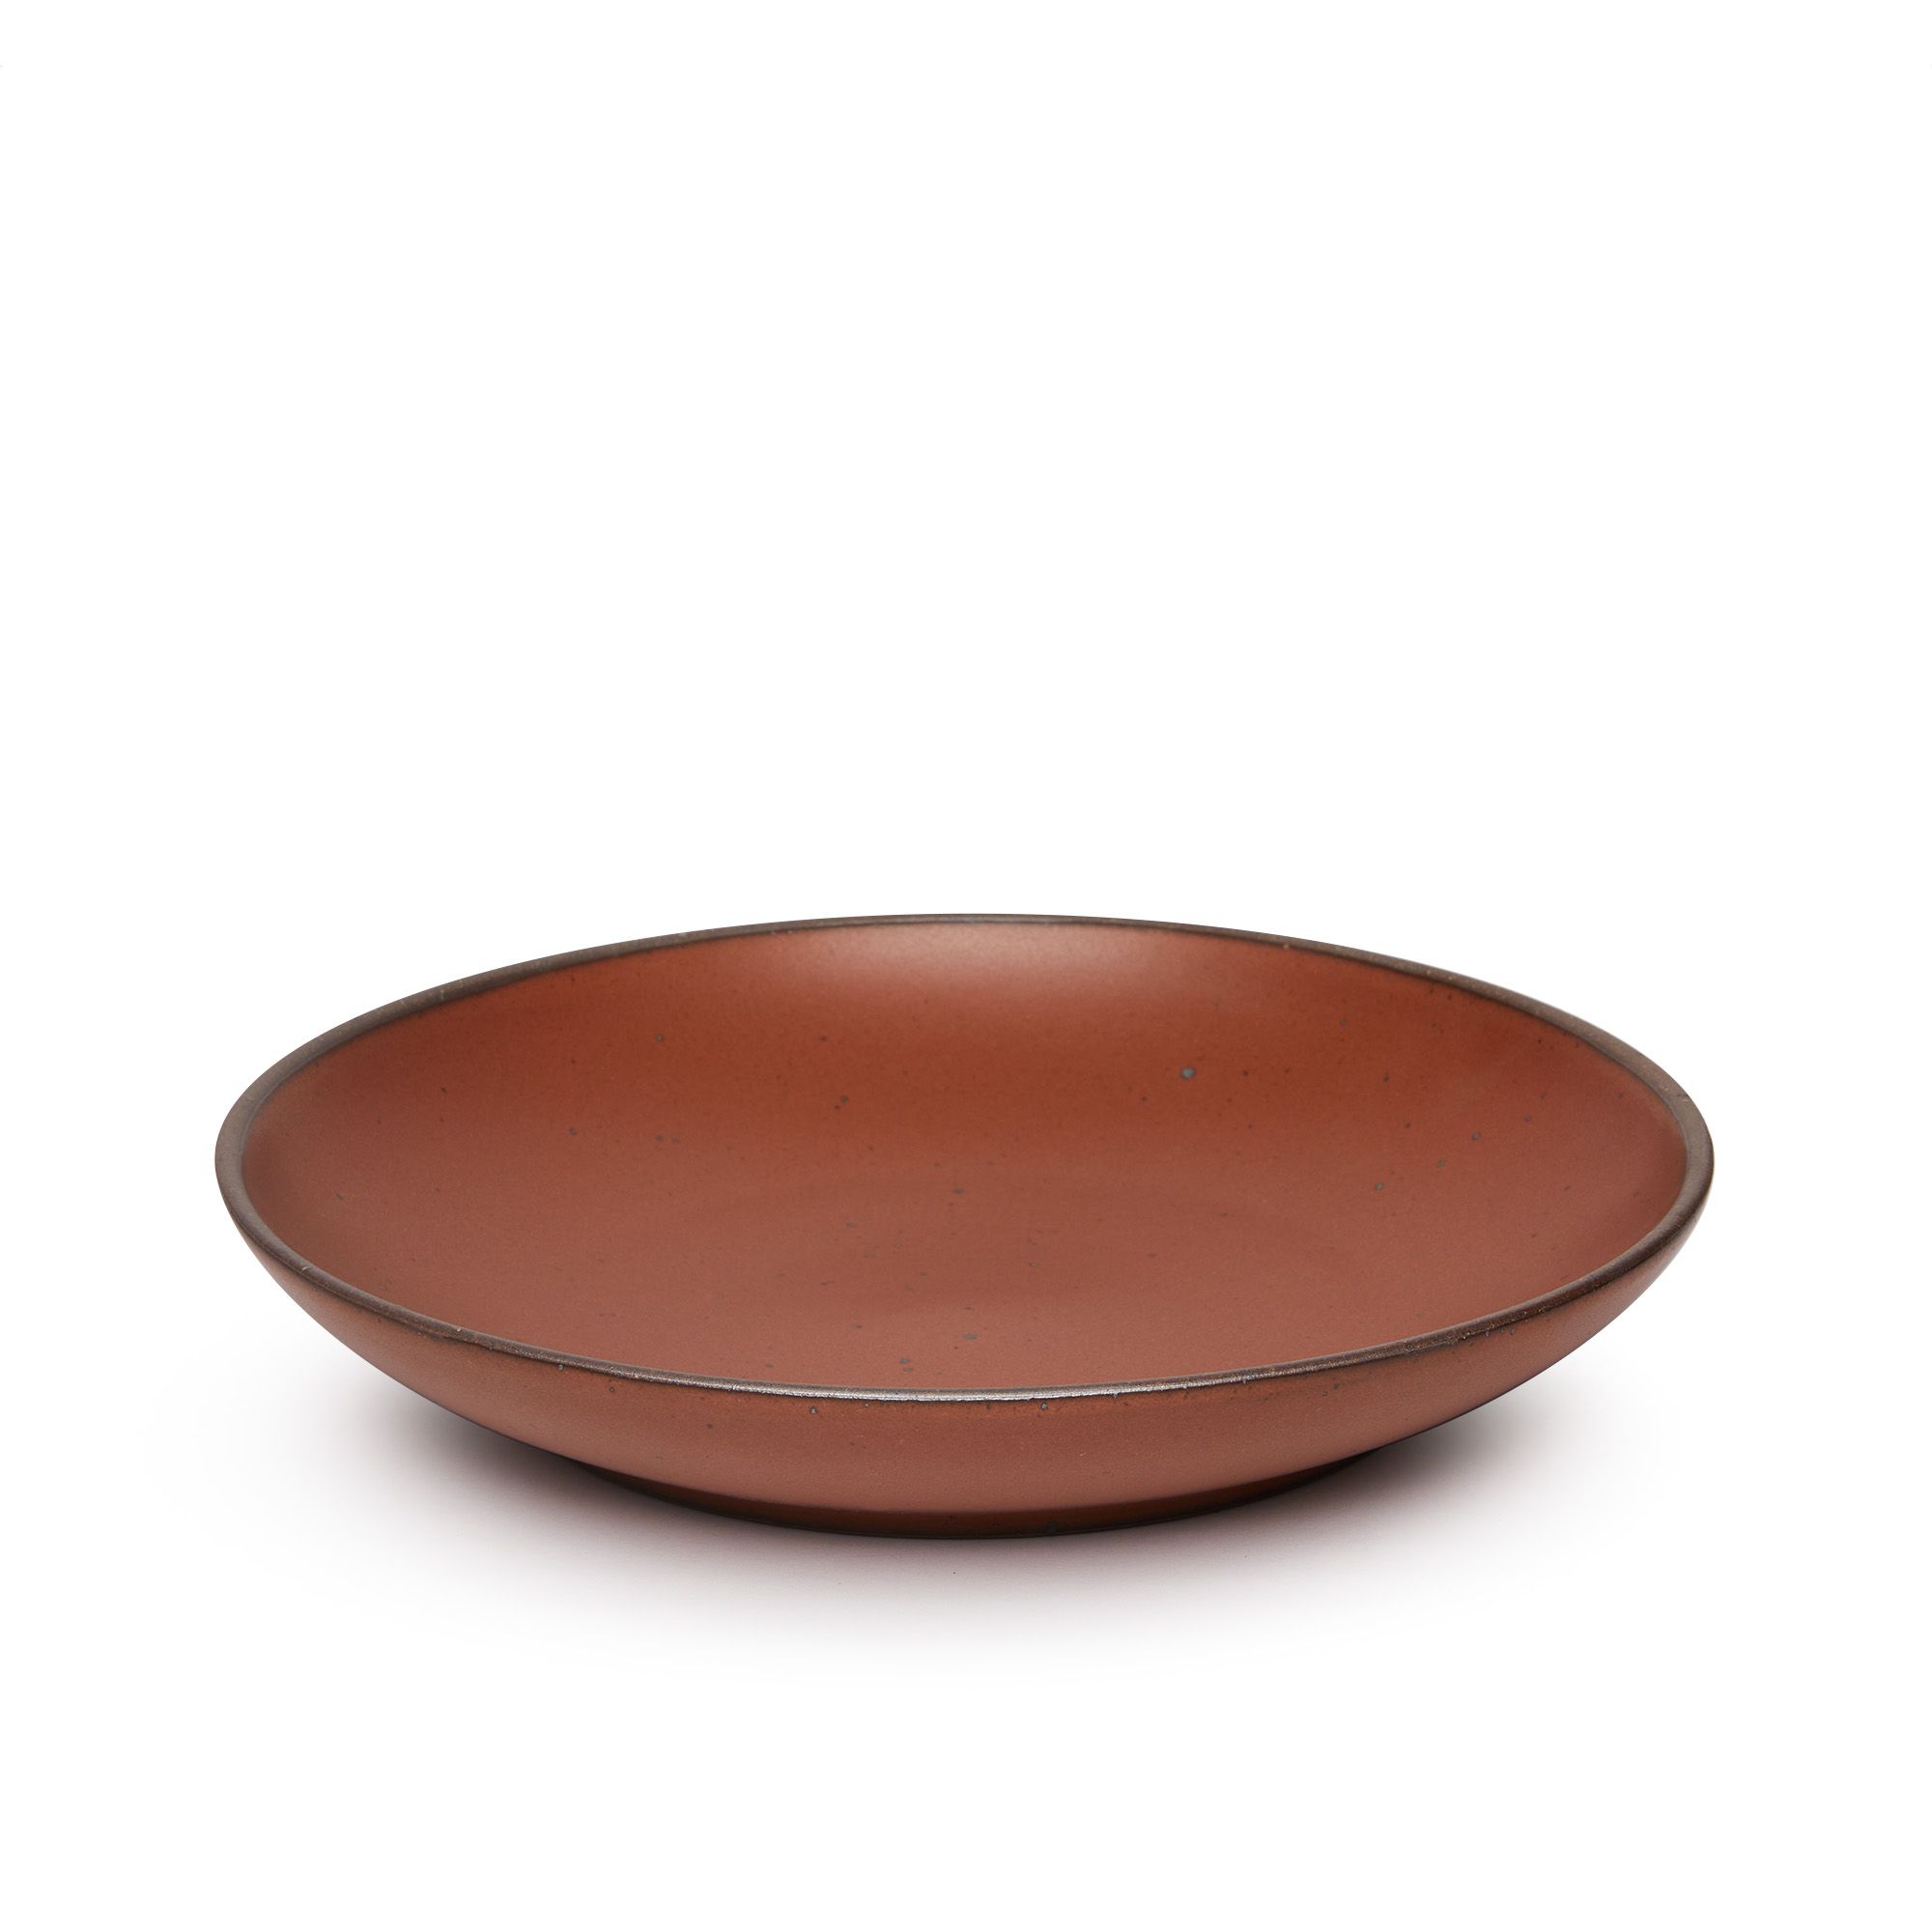 A large ceramic plate with a curved bowl edge in a cool burnt terracotta color featuring iron speckles and an unglazed rim.